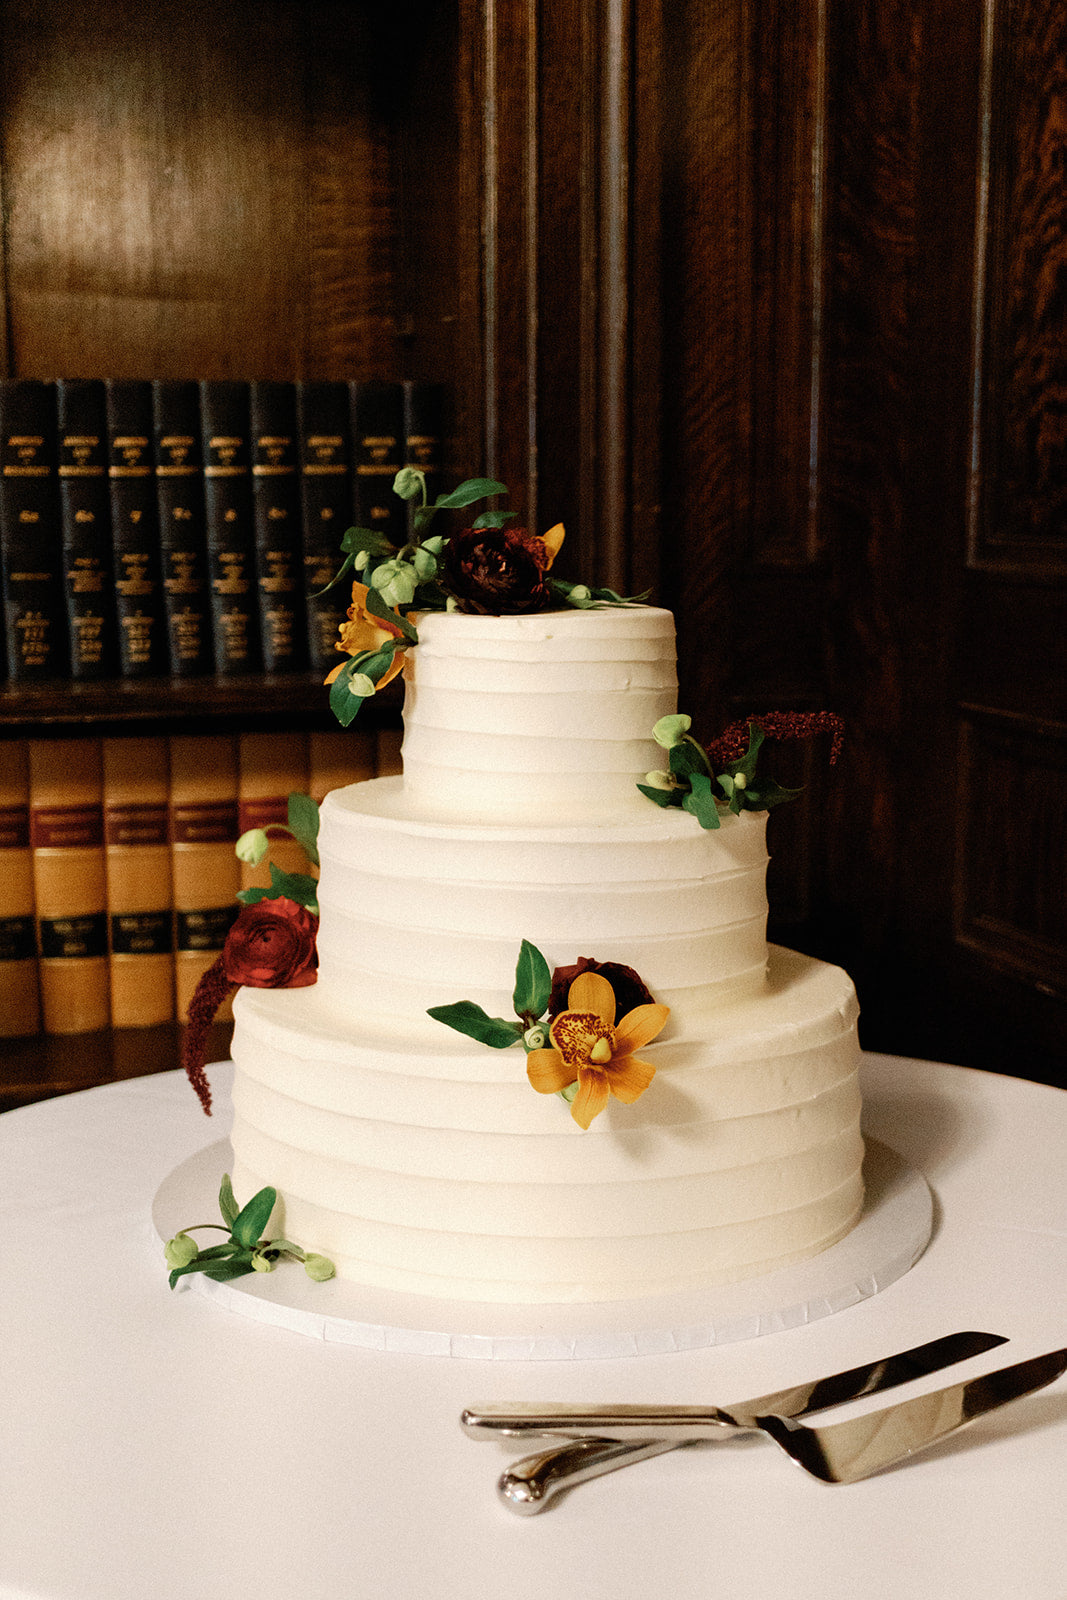 Wedding cake with dark and moody flowers in library at North Shore wedding venue.